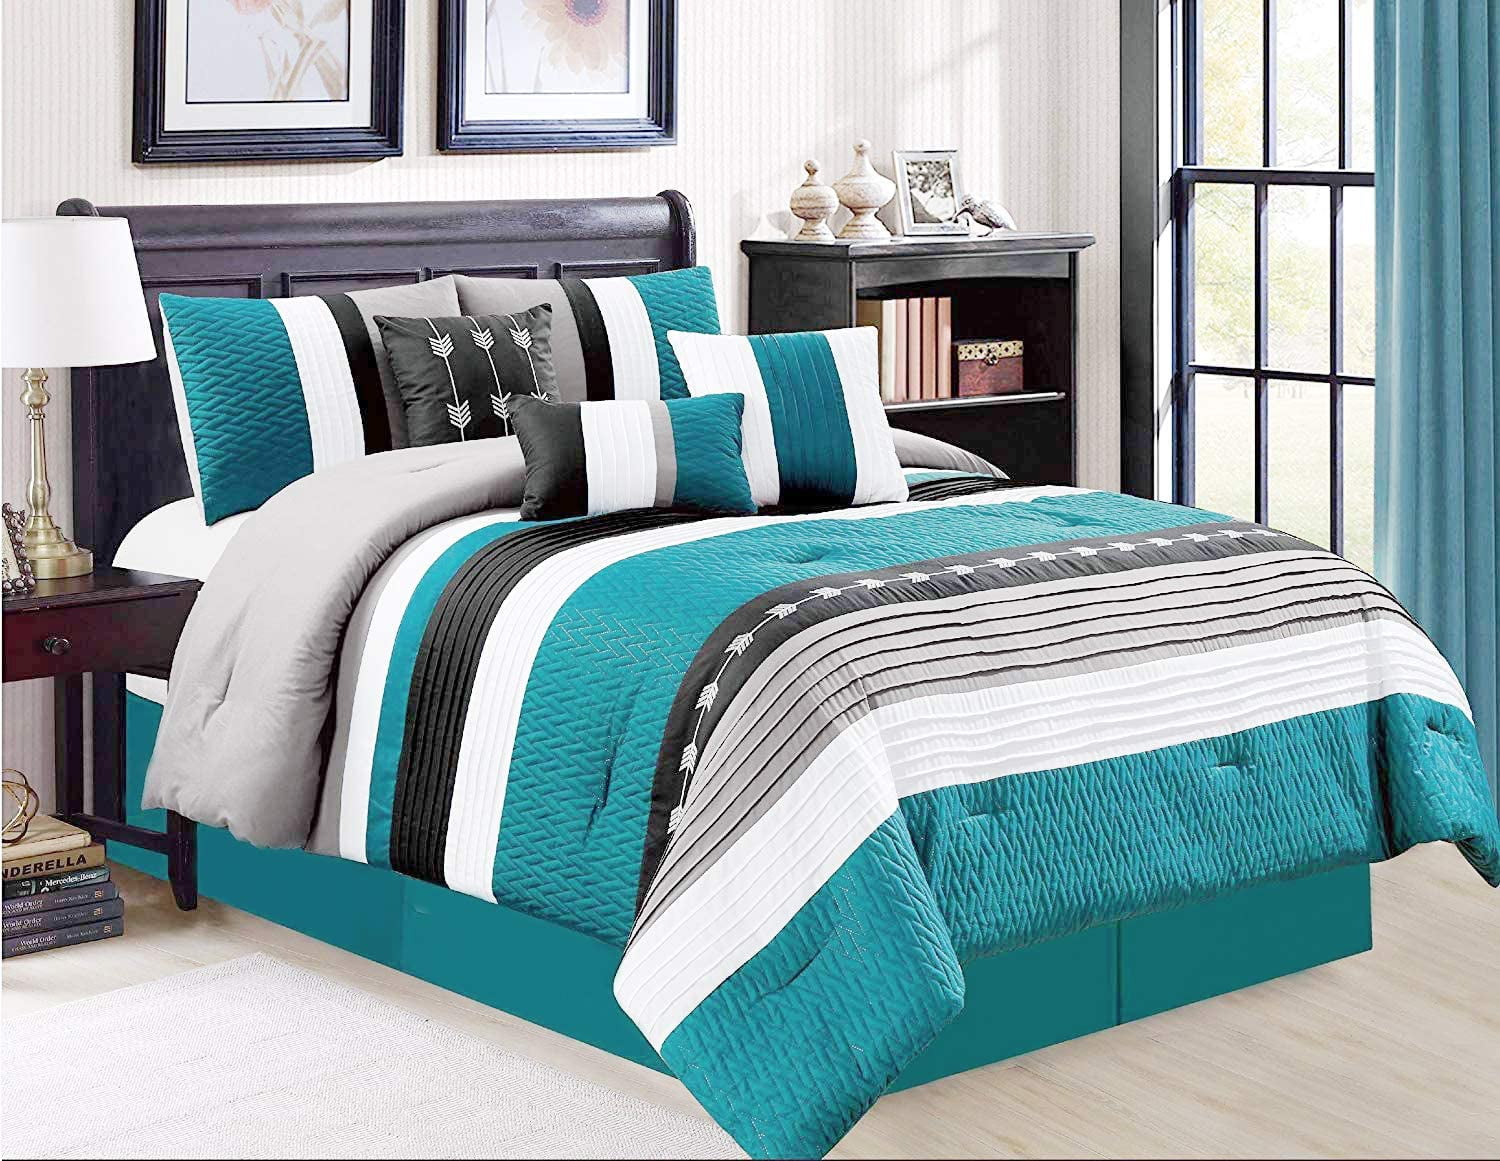 Details about   Shatex Queen Size Comforter Sets 3 Pieces Bedding Set 100% Microfiber Polyester 